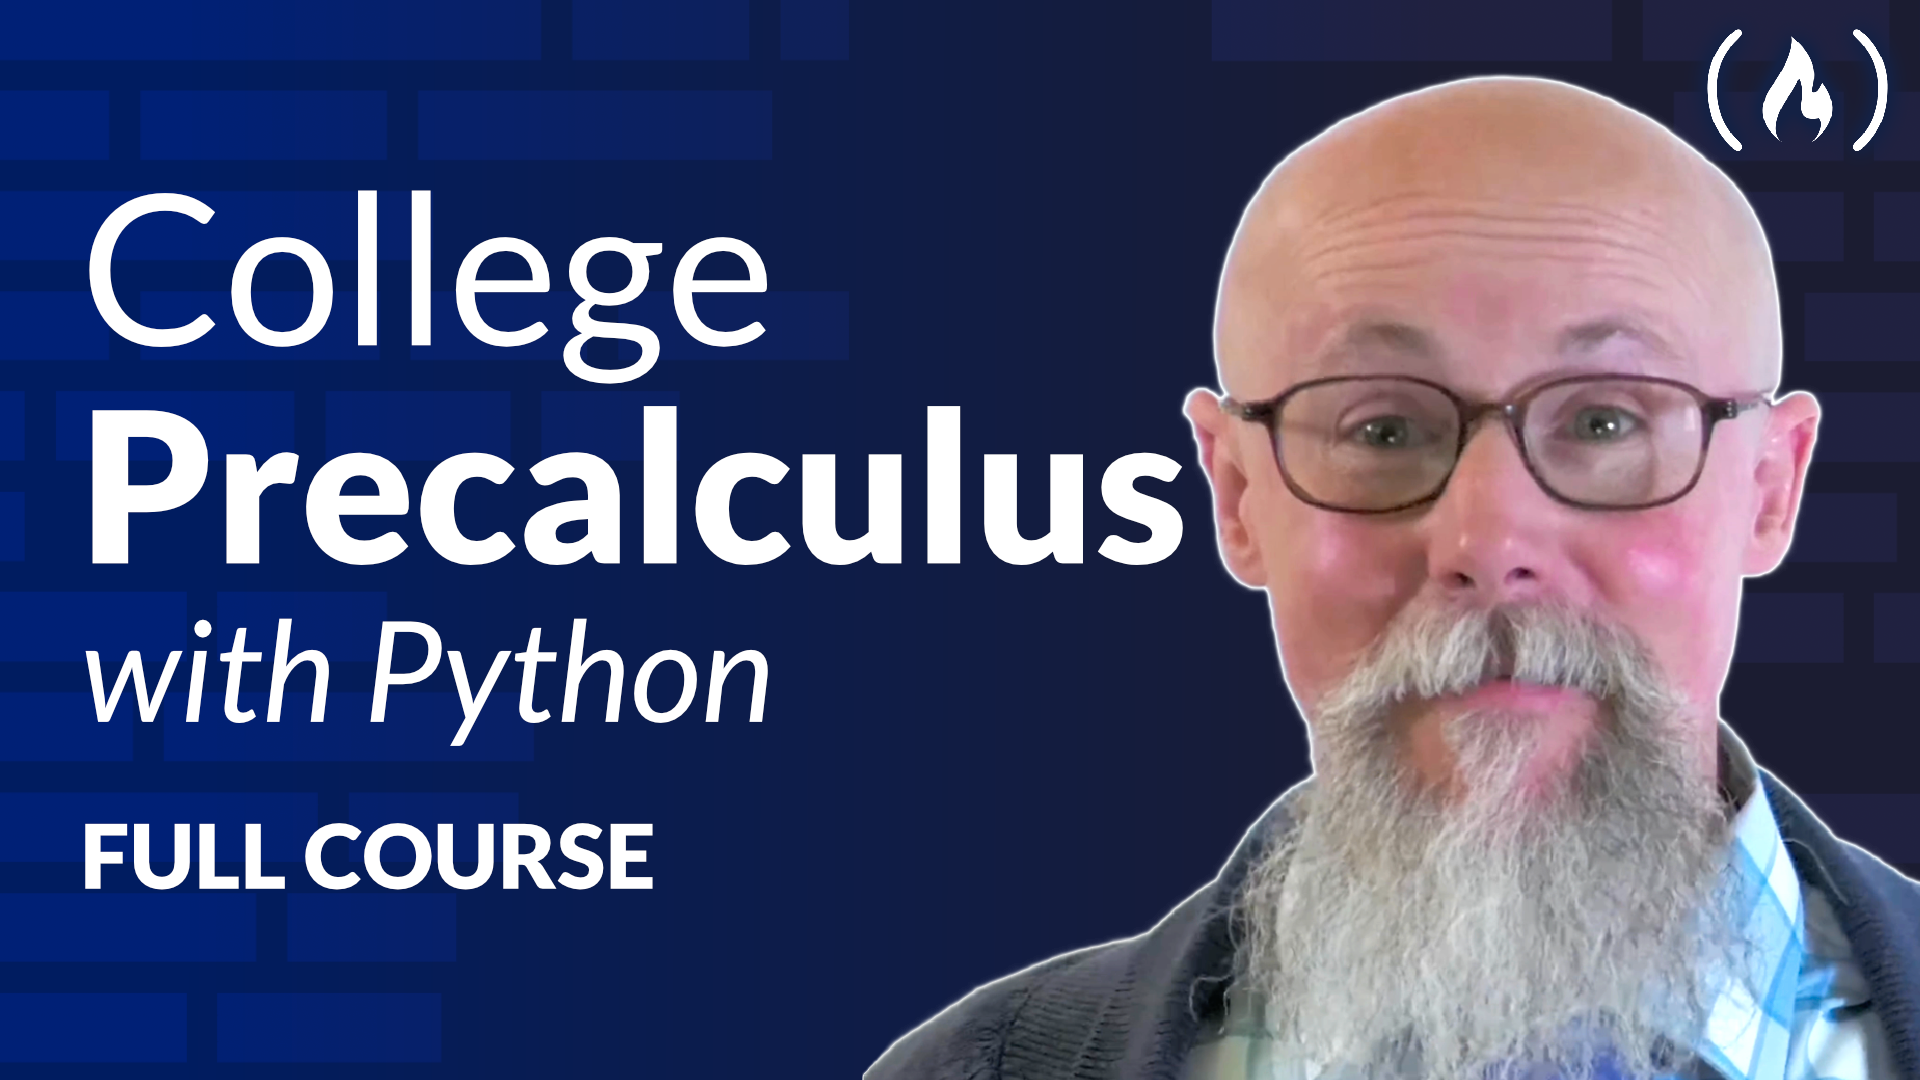 Image for Learn College Precalculus with Python